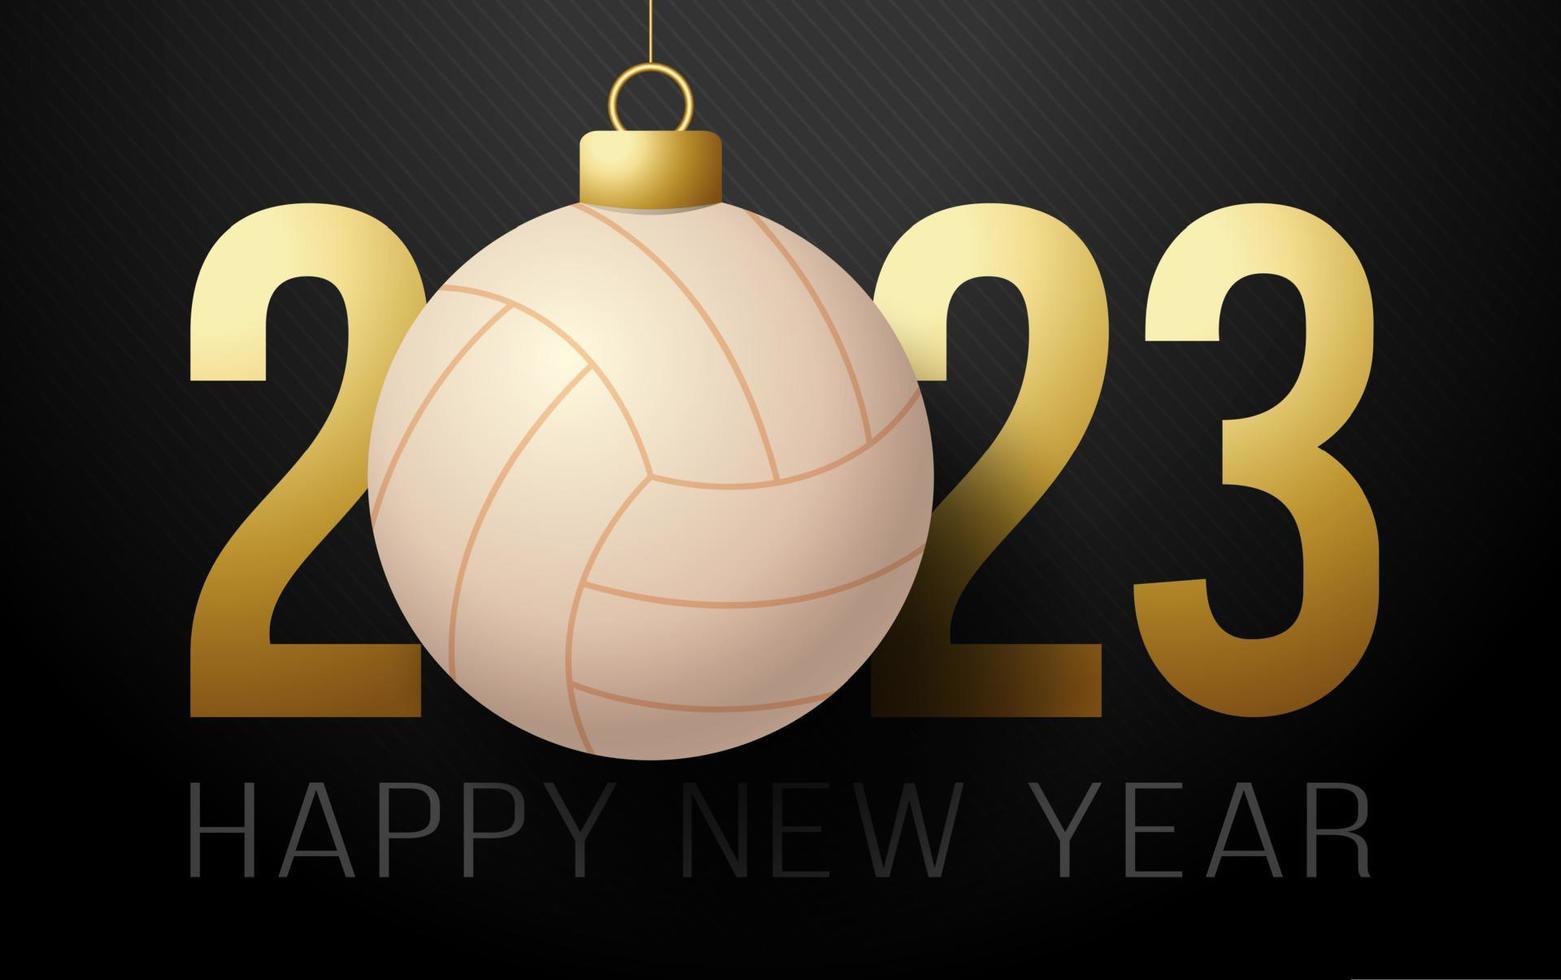 Volleyball 2023 Happy New Year. Sports greeting card with volleyball ball on the luxury background. Vector illustration.